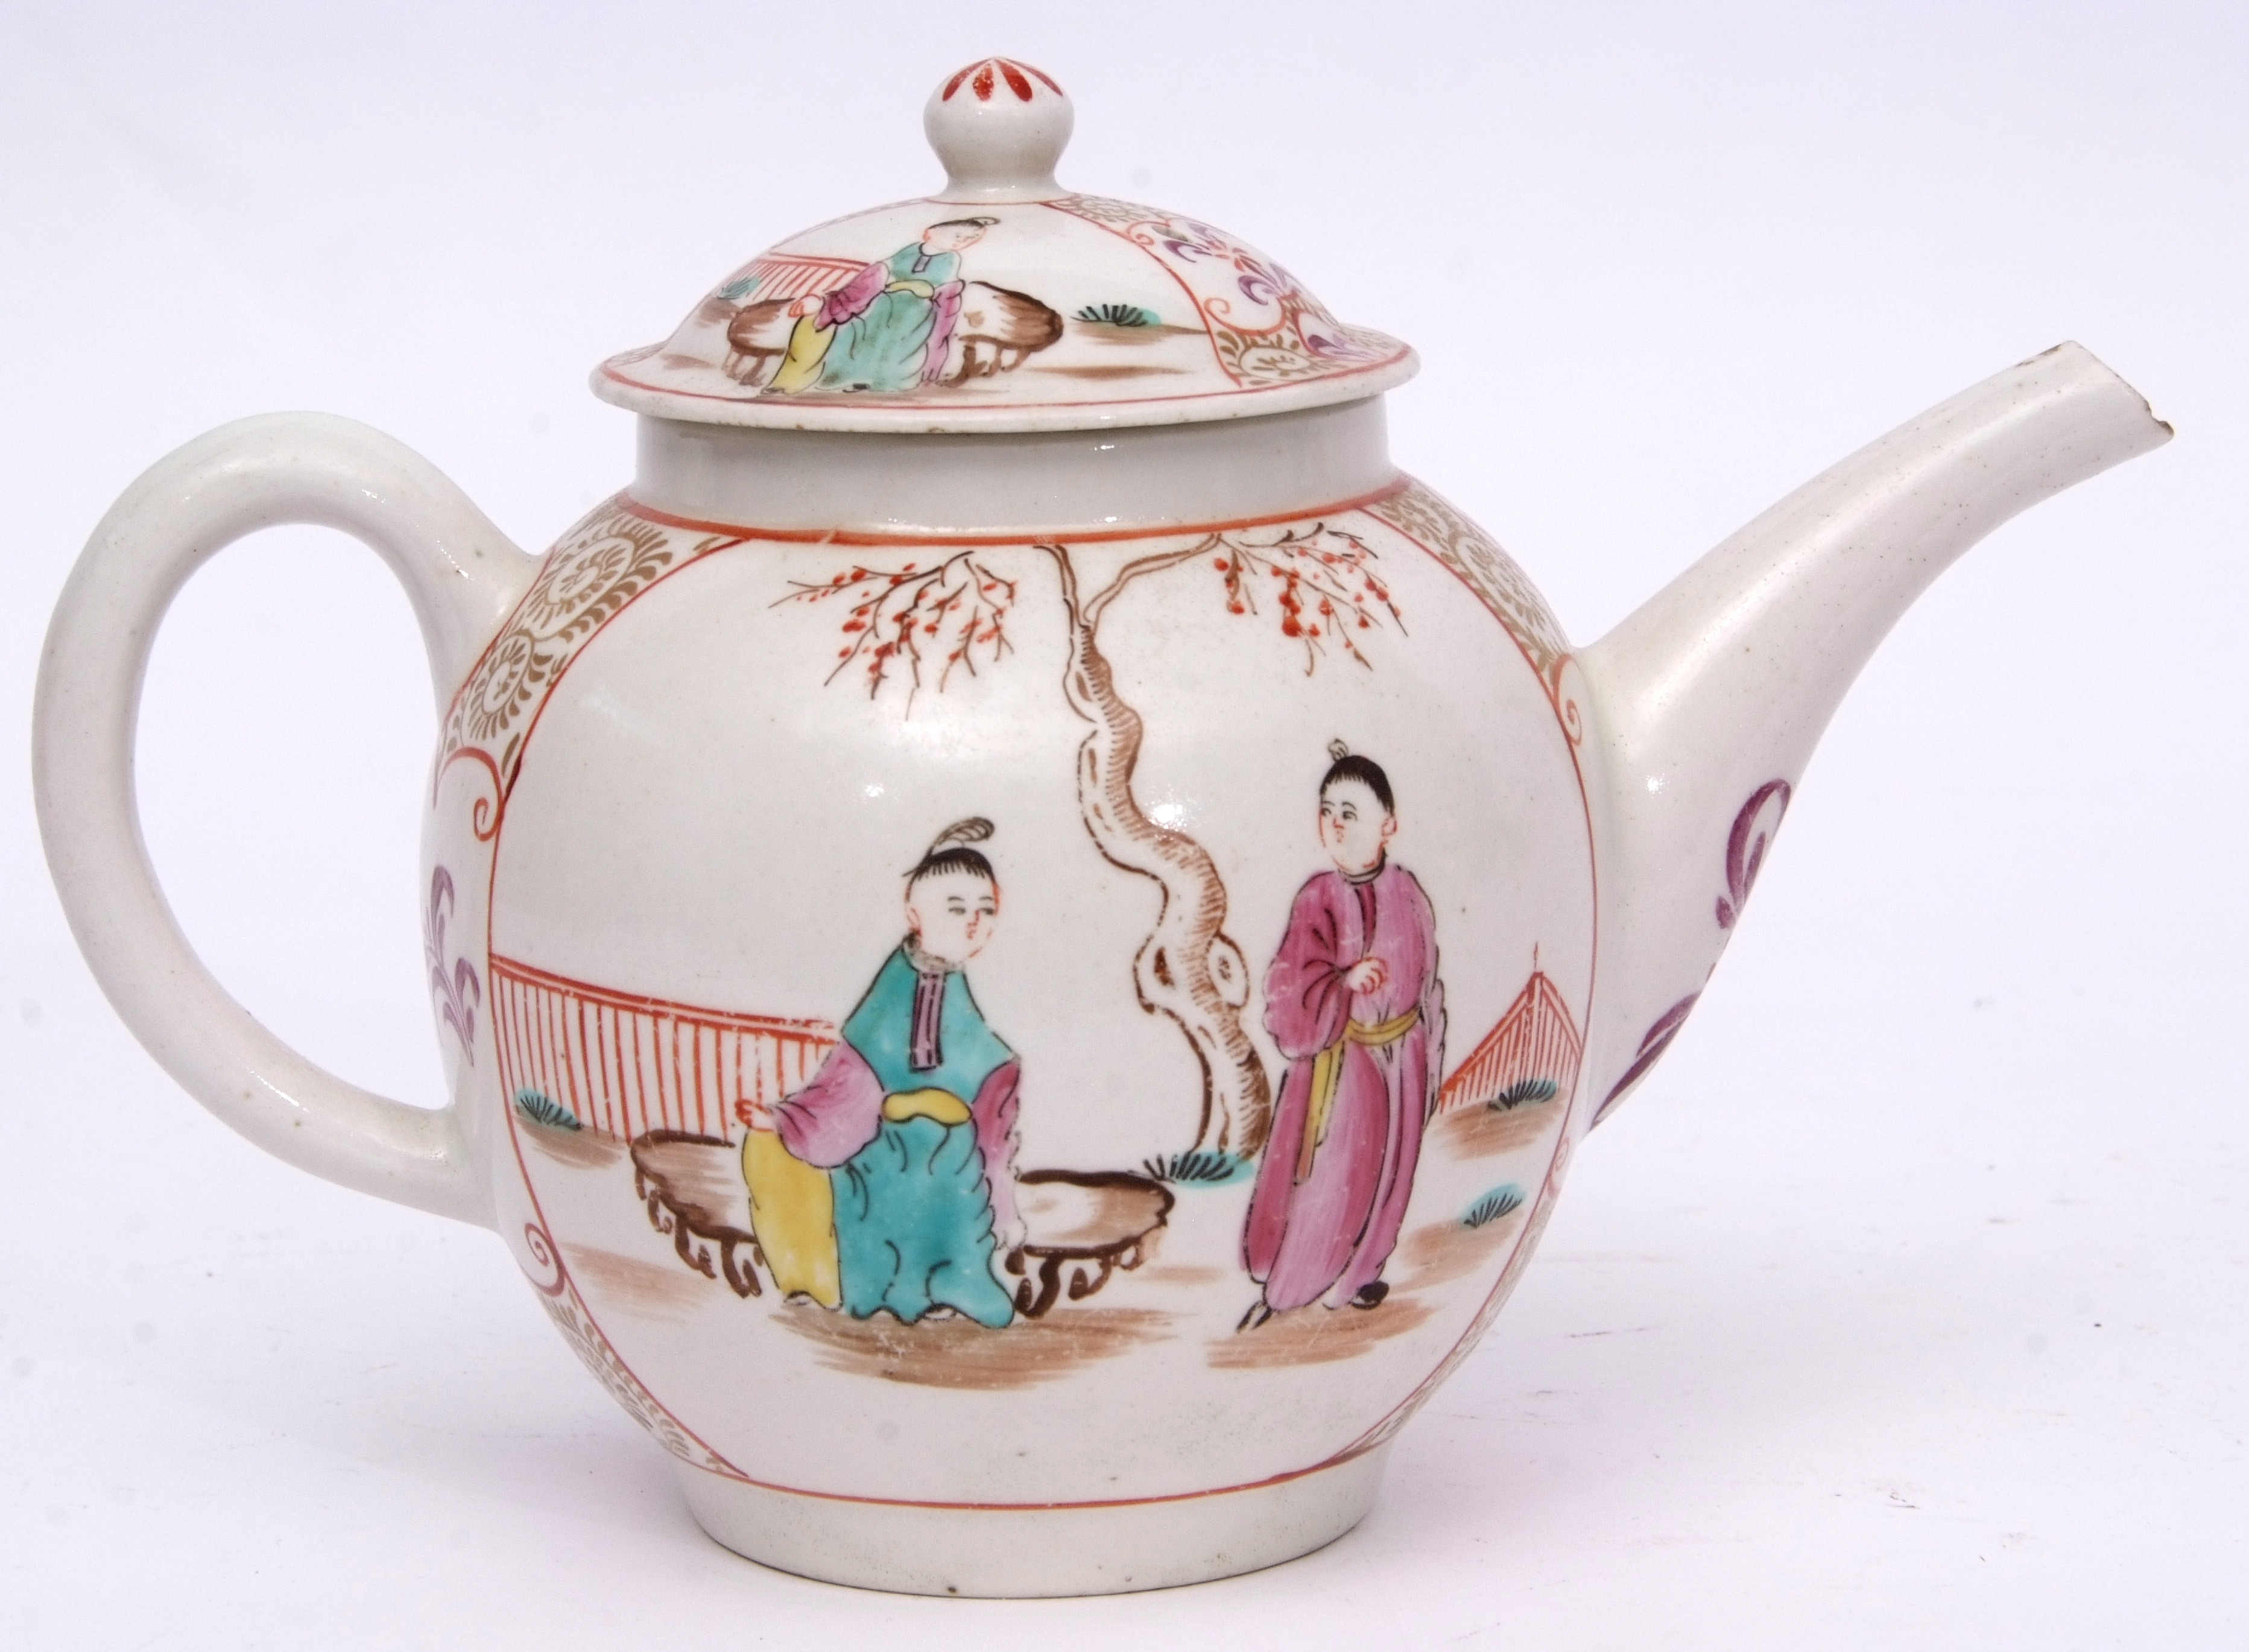 Lowestoft tea pot and cover, circa 1780, decorated in polychrome with chinoiserie scenes within gilt - Image 3 of 7